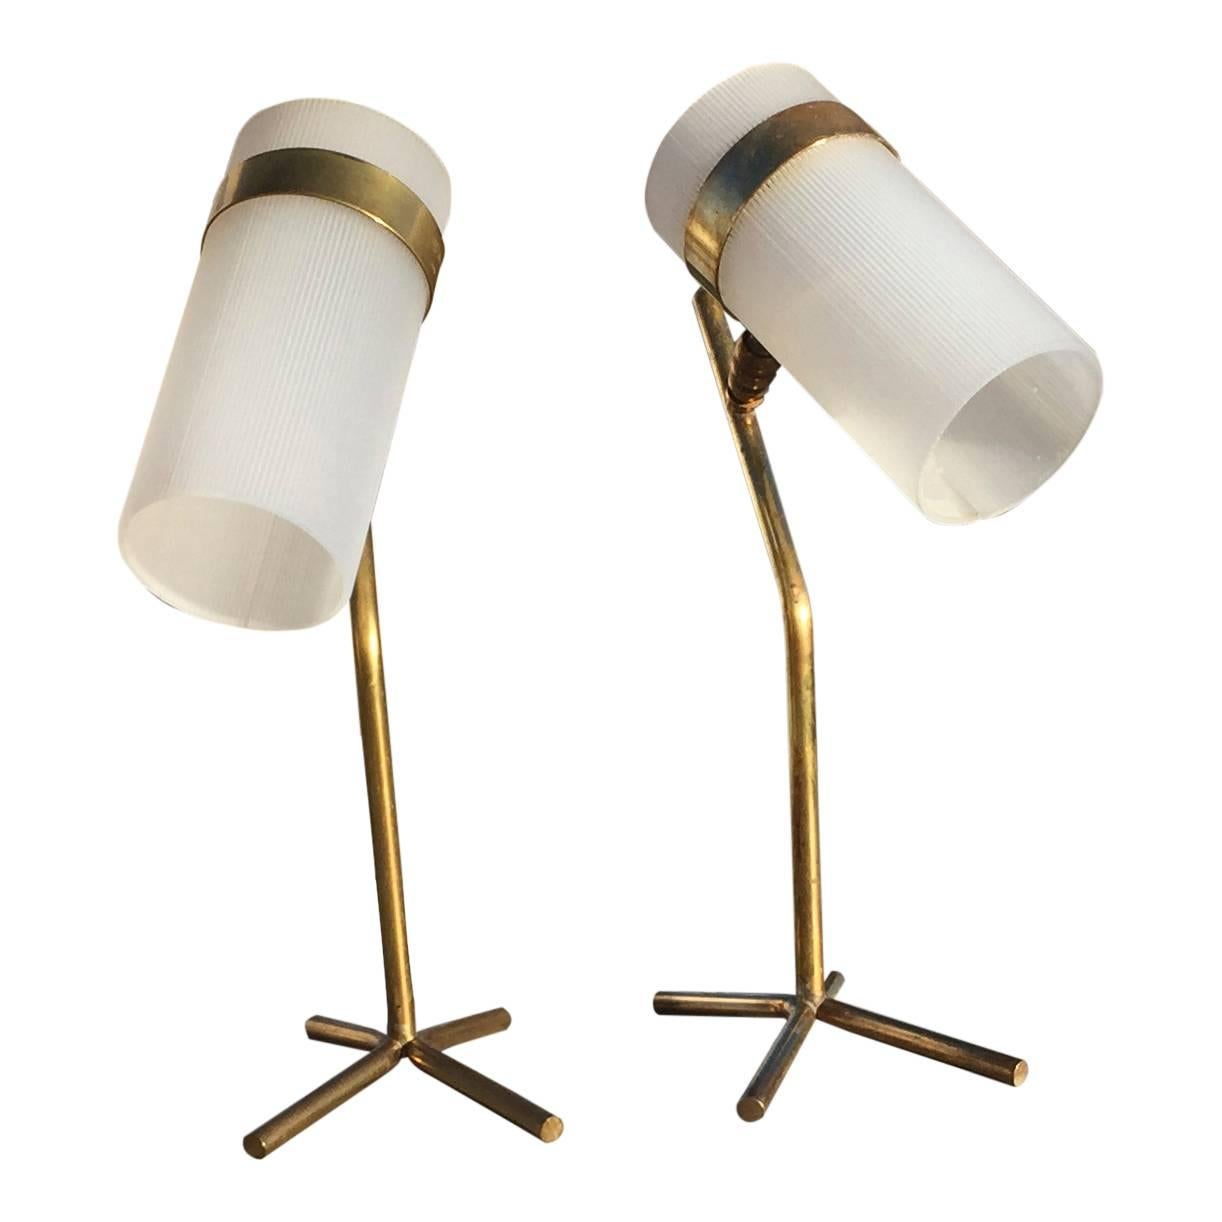 Rare pair of perspex and brass petite table lamps in the style of Biny, Guariche, Lacroix.
Shades rotates in multiple directions,
original shade is made of bet sheet of textured perspex.
Shade's diameter is 7cm.
European socket and wiring
these